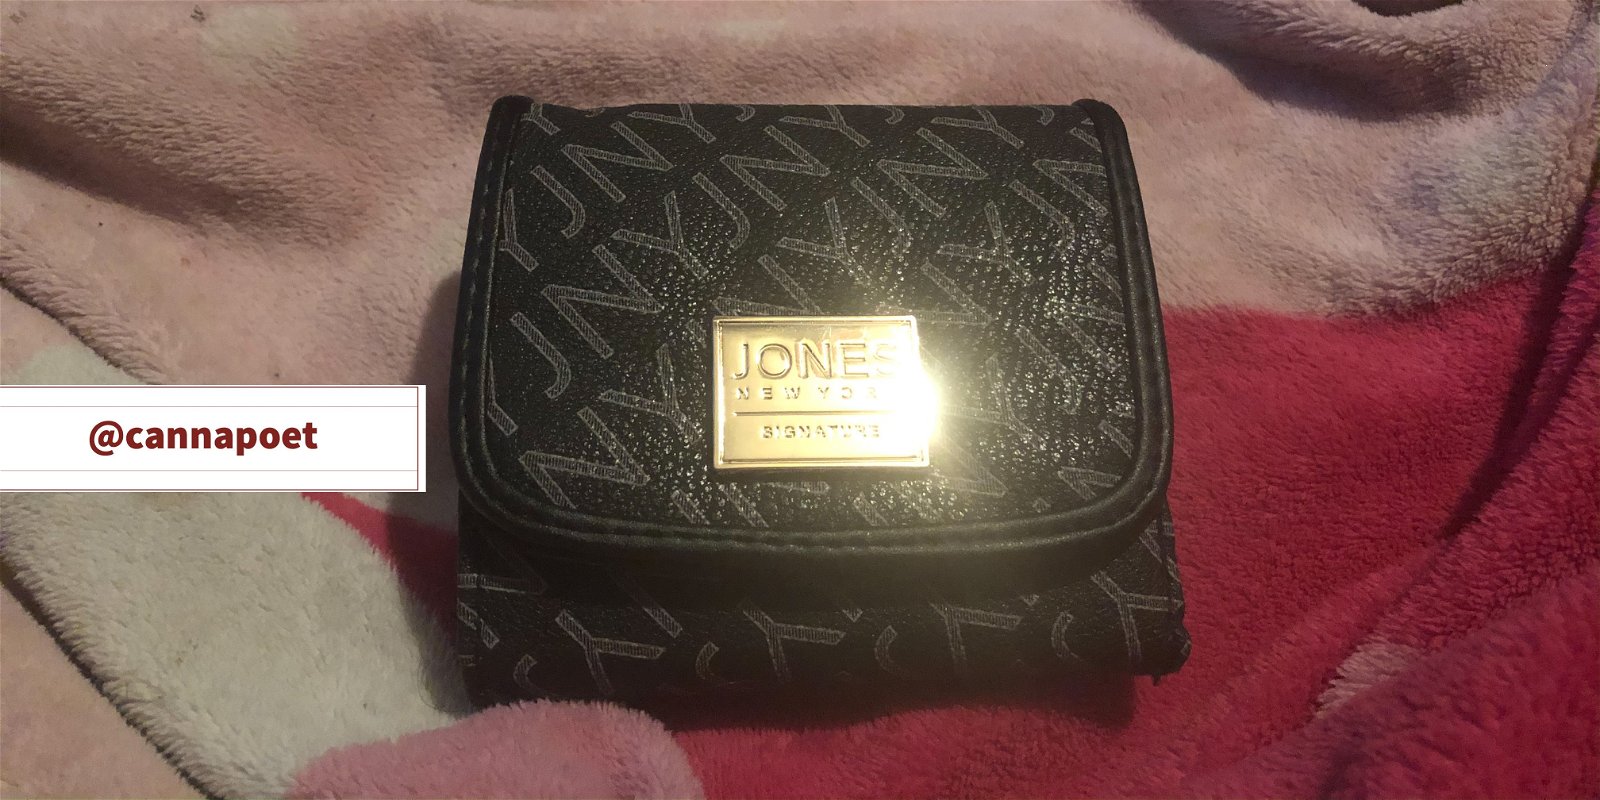 Photo by Luna Frost with the username @cannapoet, who is a star user,  December 4, 2019 at 3:24 AM and the text says 'Forgot to post this Awhile ago. Love my New Wallet from the Jones New York Signature Collection'